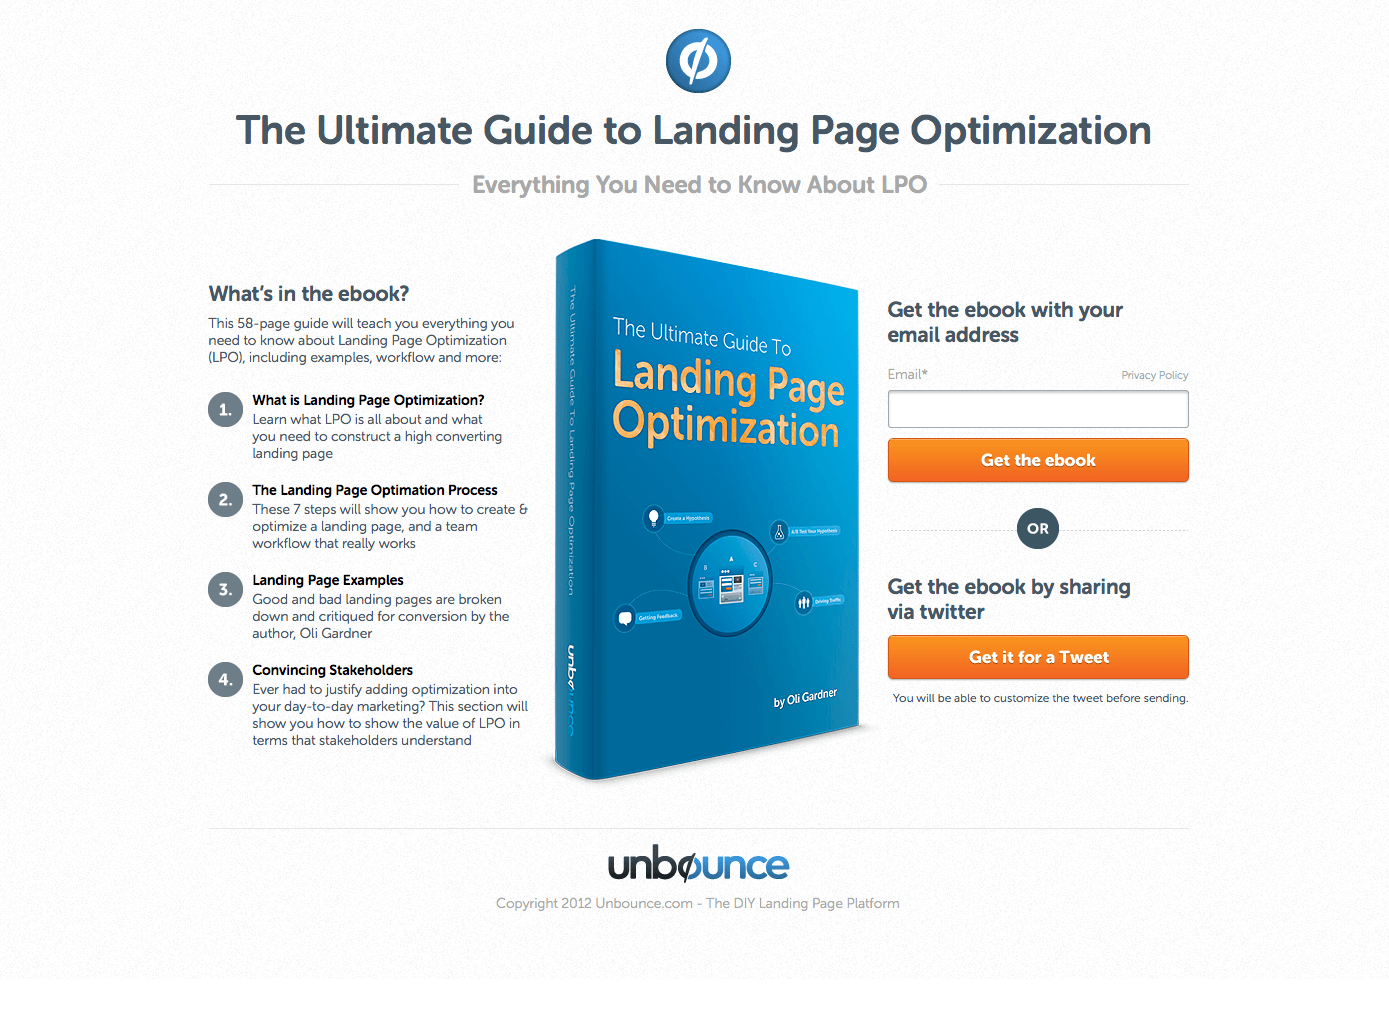 Ultimate Guide to Landing Page Optimization